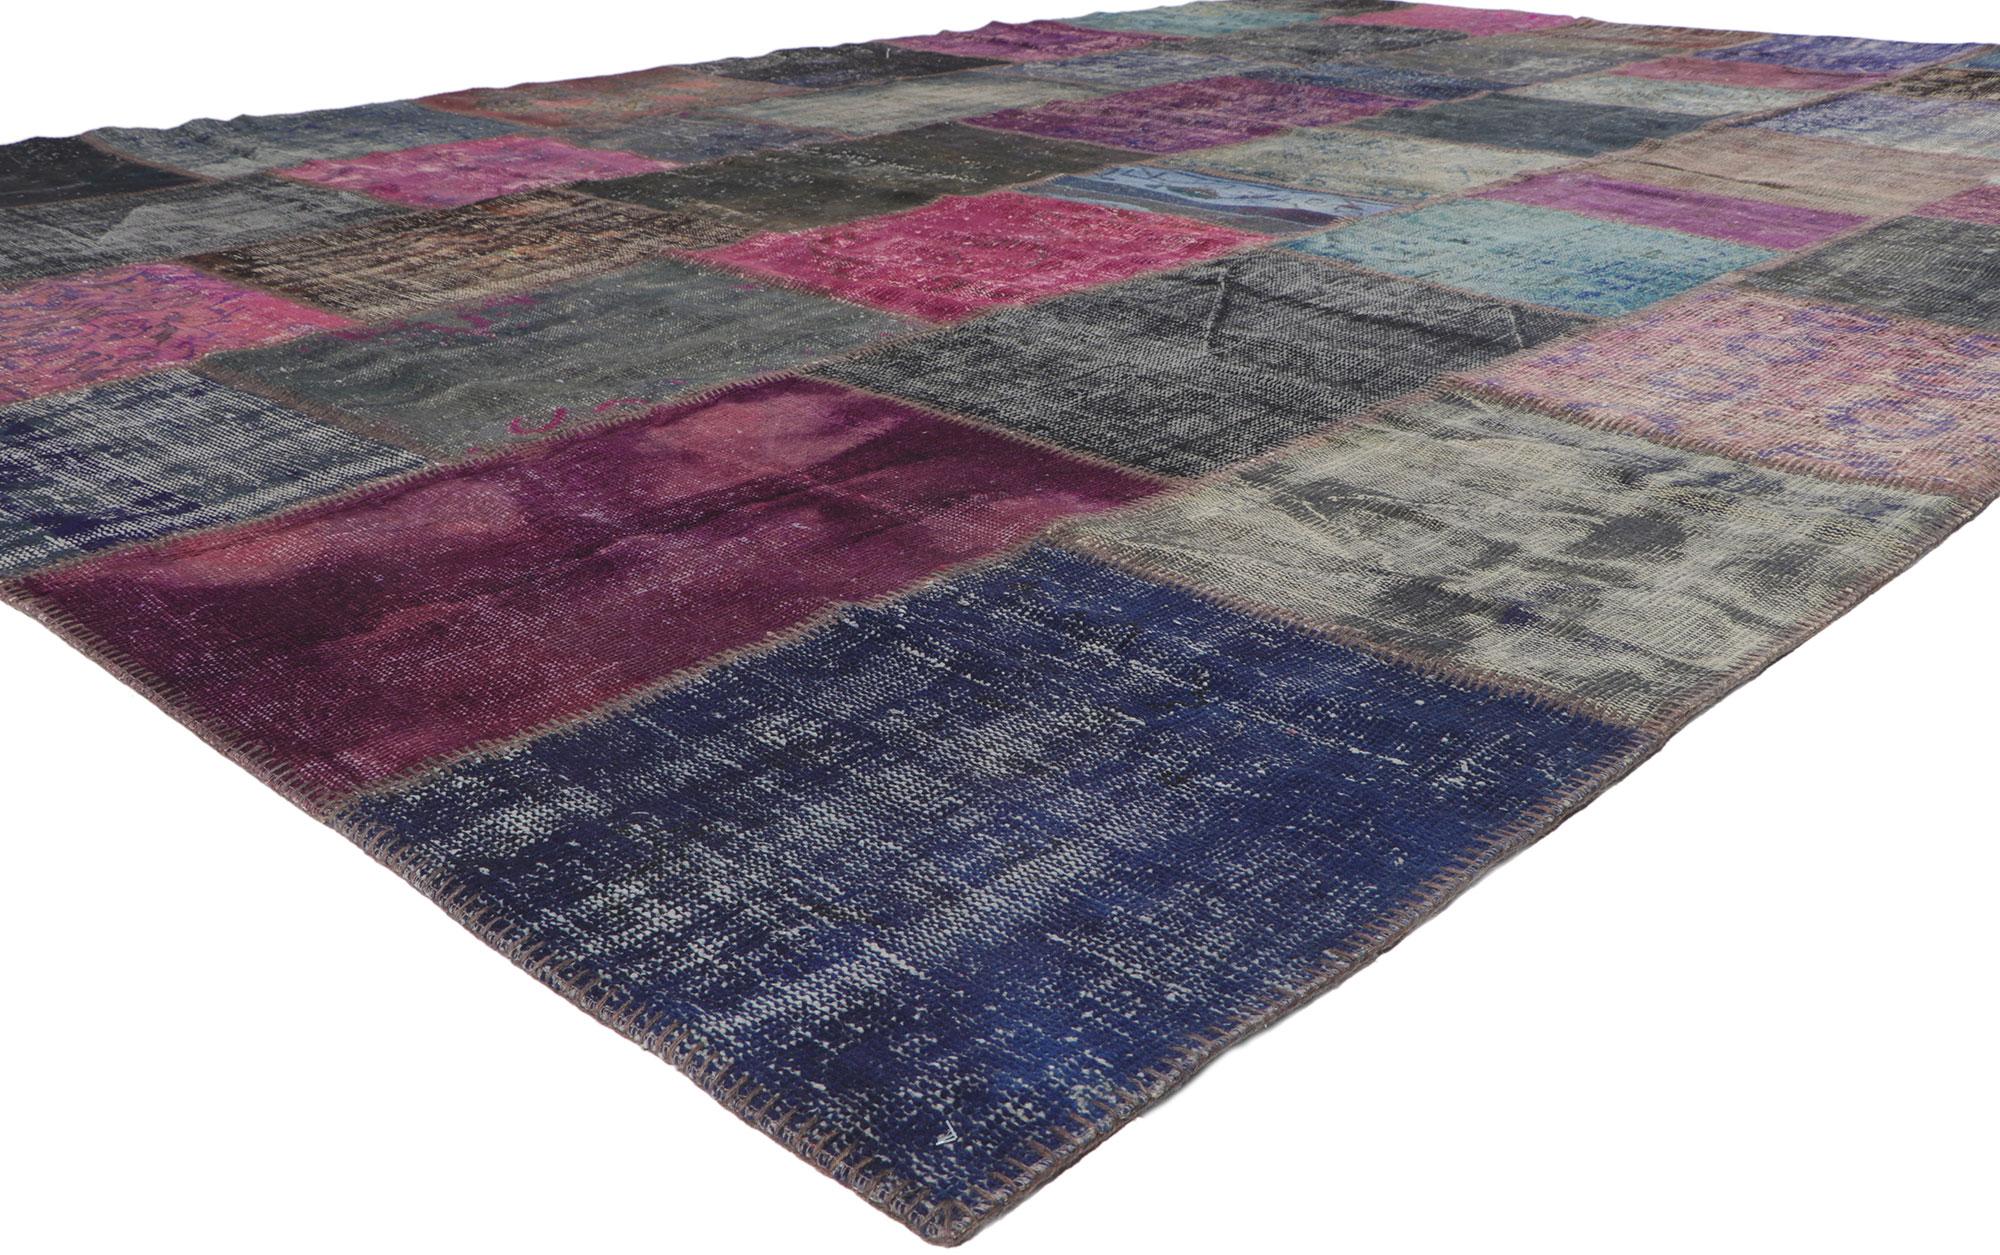 52130 Vintage purple patchwork rug 11'00 x 16'03. Cleverly composed with well-balanced asymmetry, this hand-knotted wool vintage patchwork rug is a captivating vision of woven beauty. The eye-catching geometric pattern and lively purple colors woven